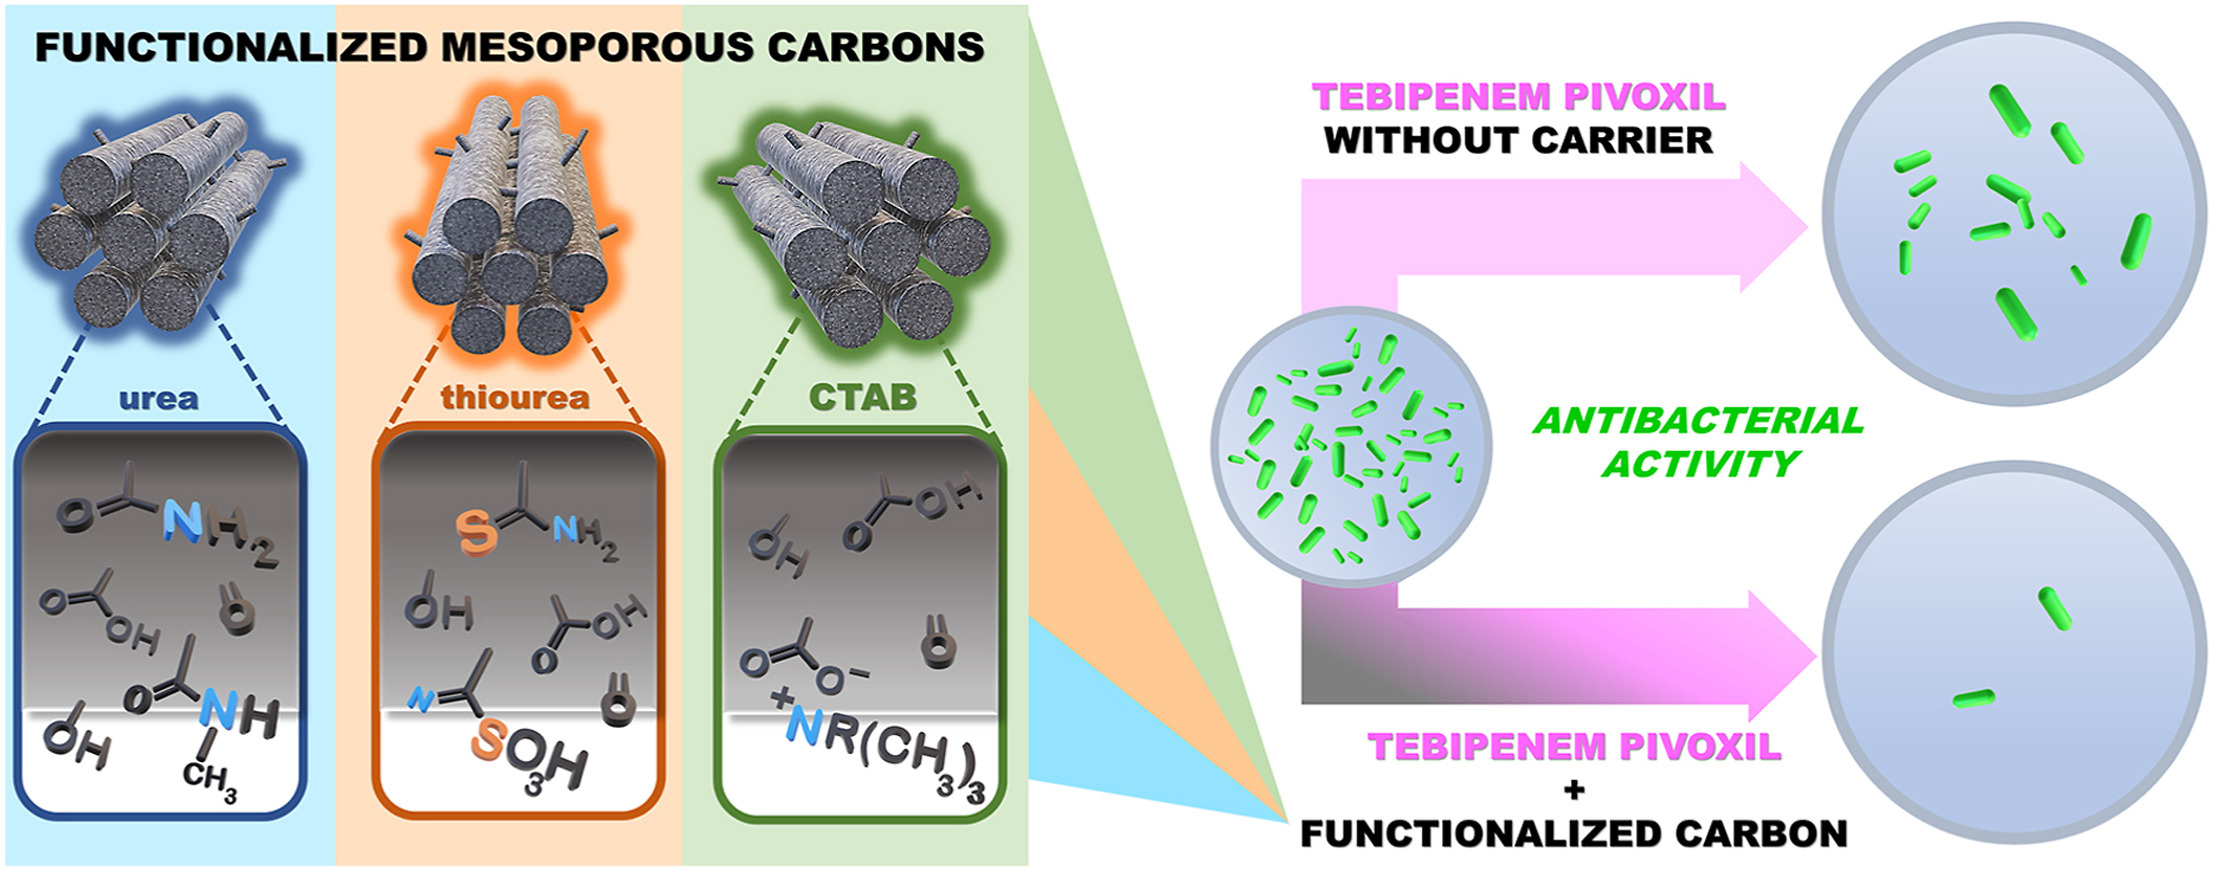 Enhancing antimicrobial activity of β-lactam antibiotic via functionalized mesoporous carbon-based delivery platforms